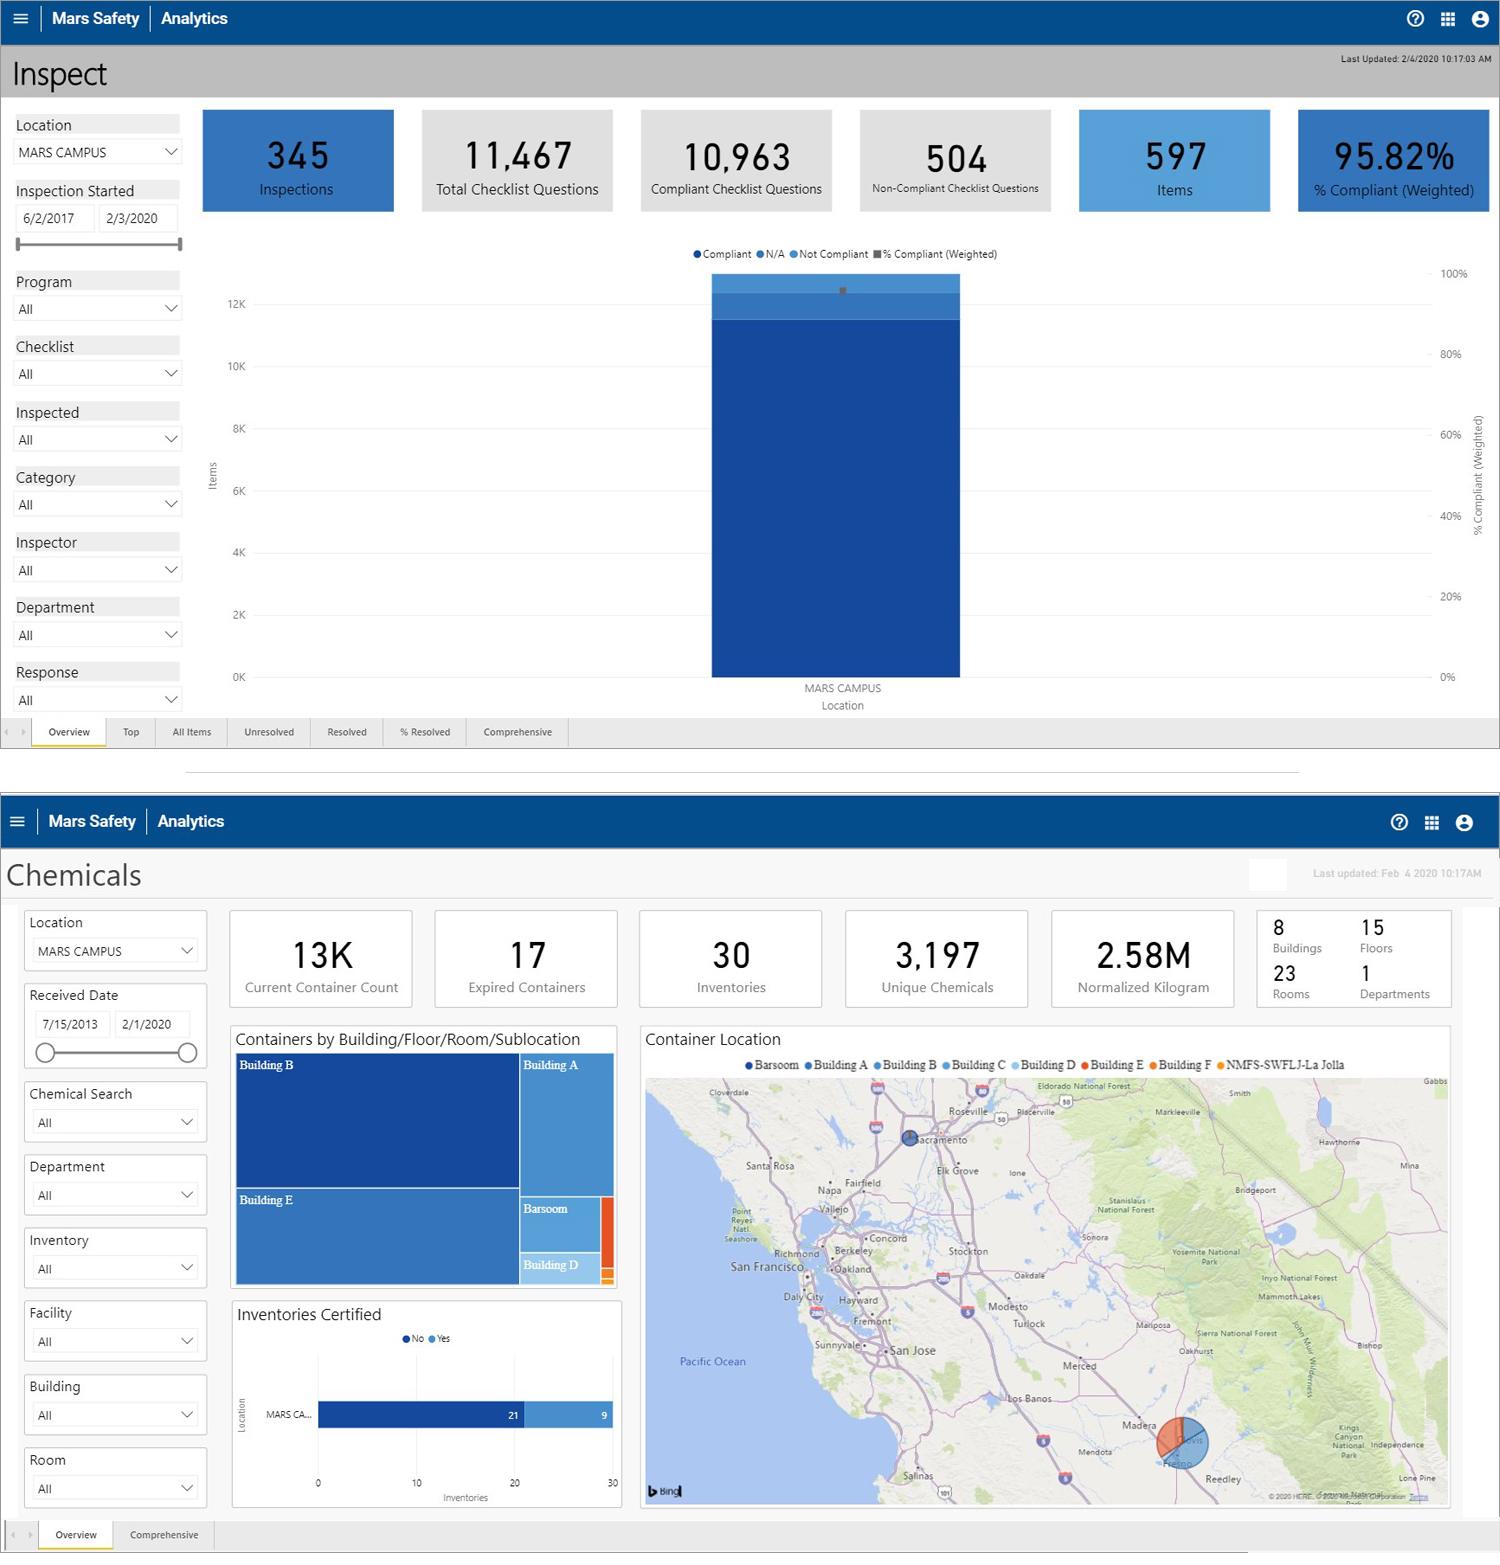 An analytical dashboard displaying various chemical inspection metrics, with graphs, charts, and data tables showcasing trends and analysis of chemical properties and processes.